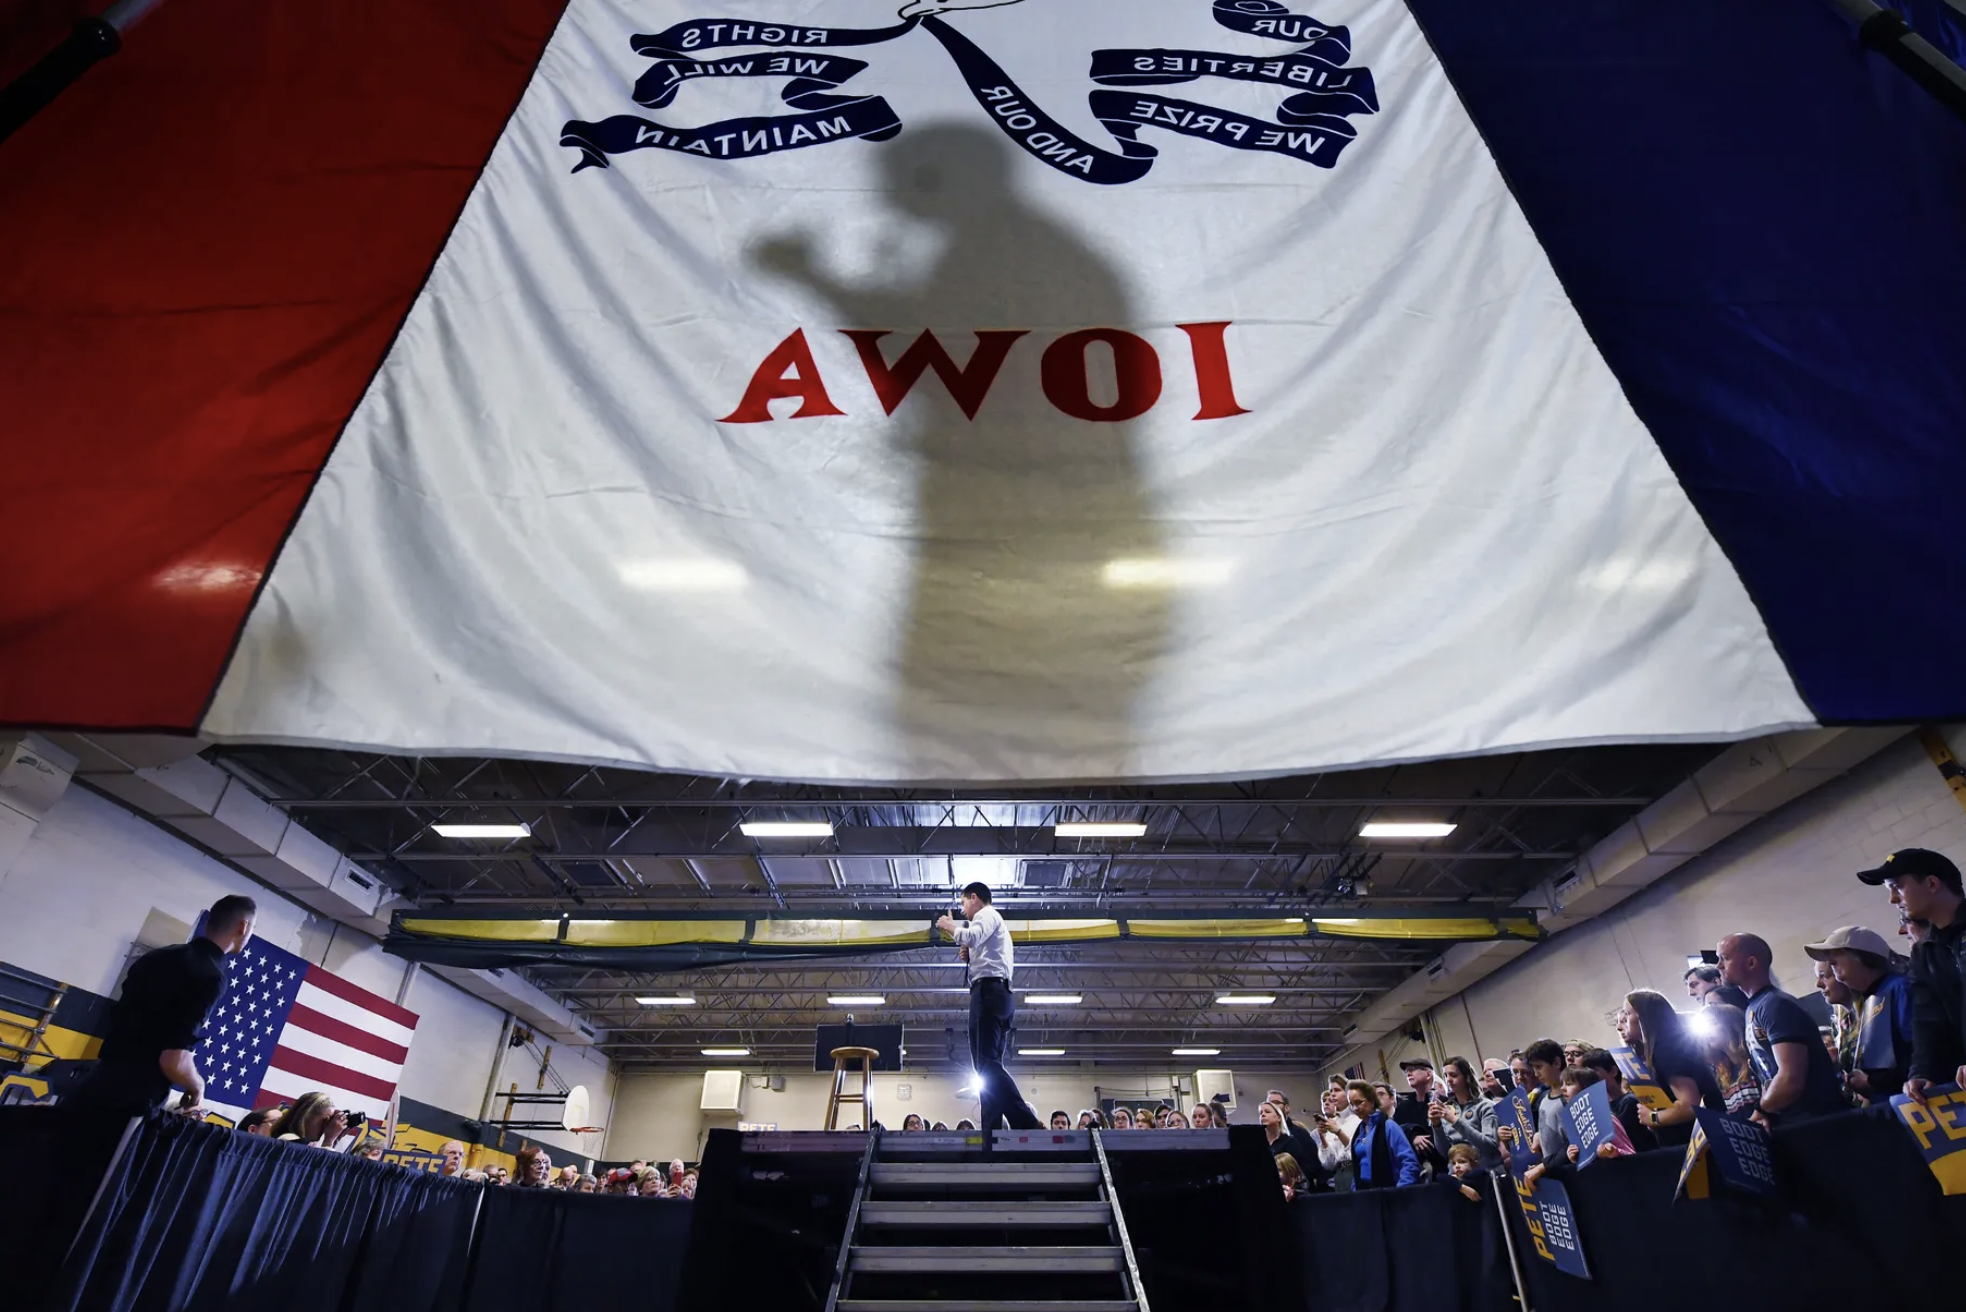 A shadow of a man is cast on a large white banner reading “Iowa” hanging in a school gym, where the middle of the room is a stage platform and the man is walking onto it.